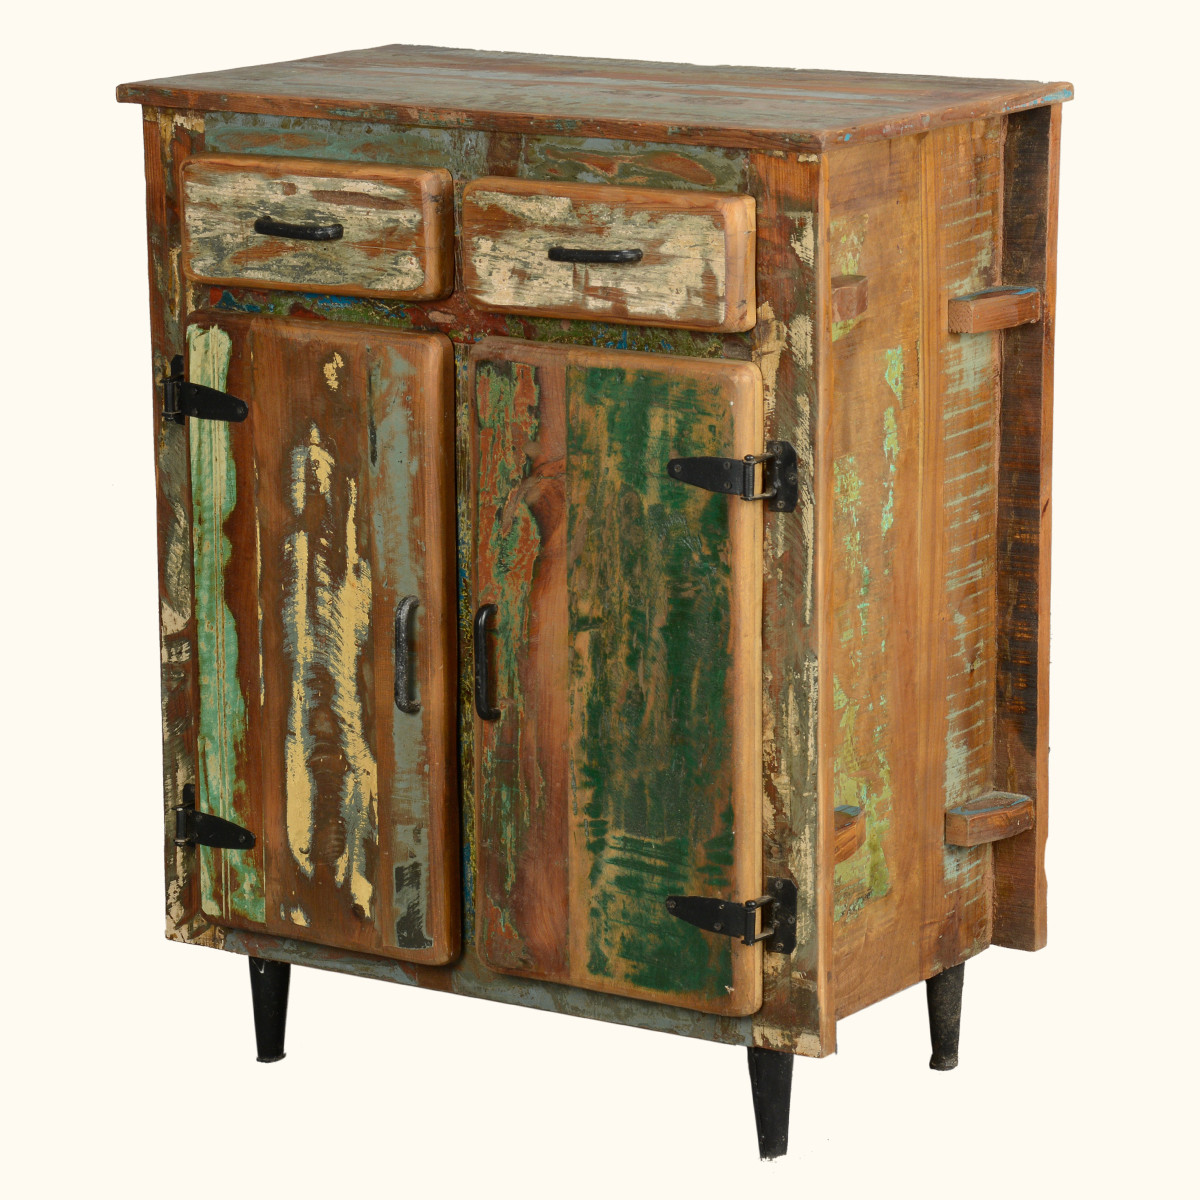 Rustic Kitchen Buffets
 Reclaimed Wood Rustic Kitchen Utility Storage Cabinet